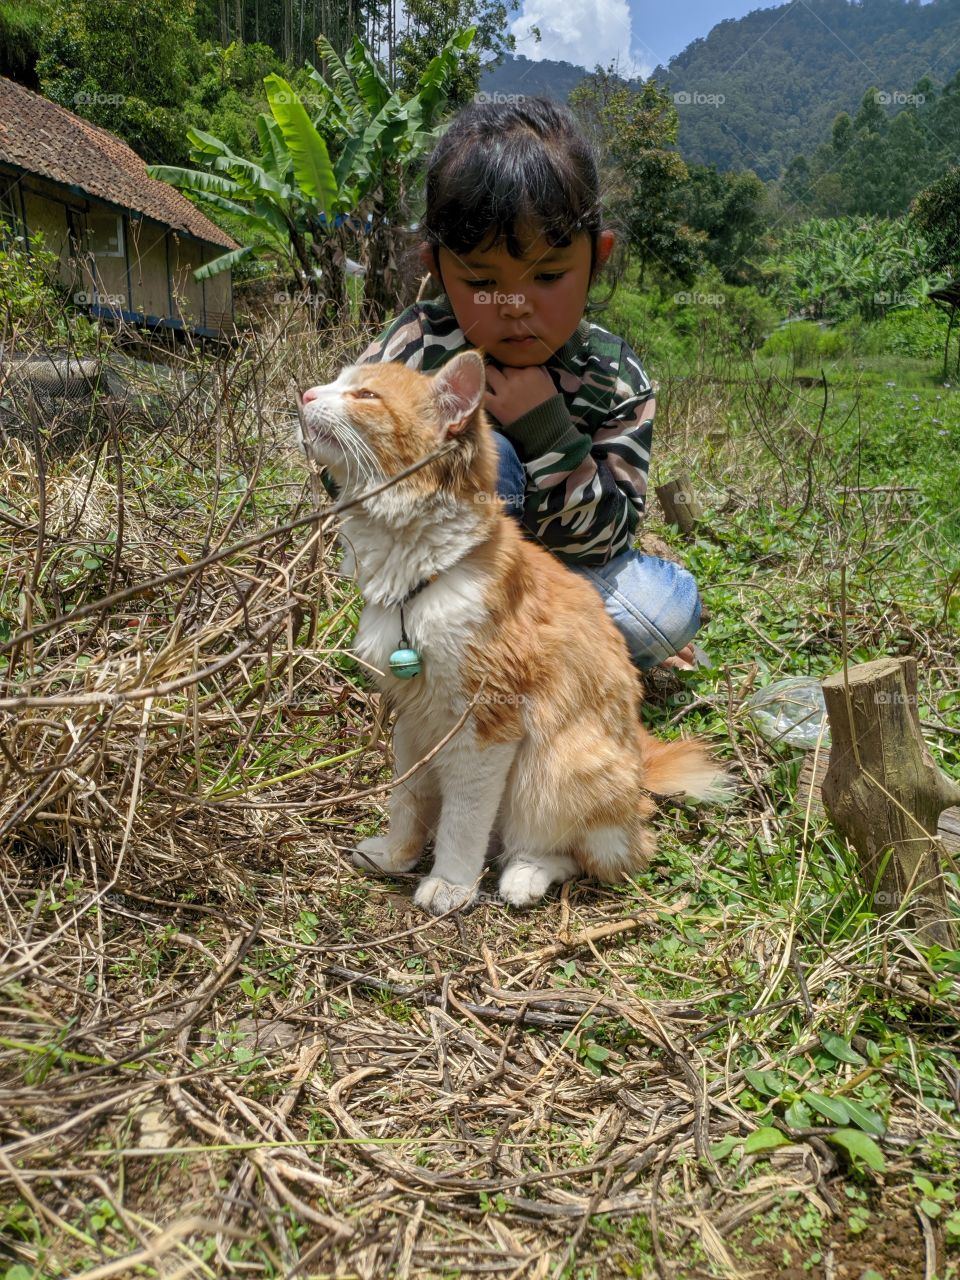 a little girl is playing with a cat